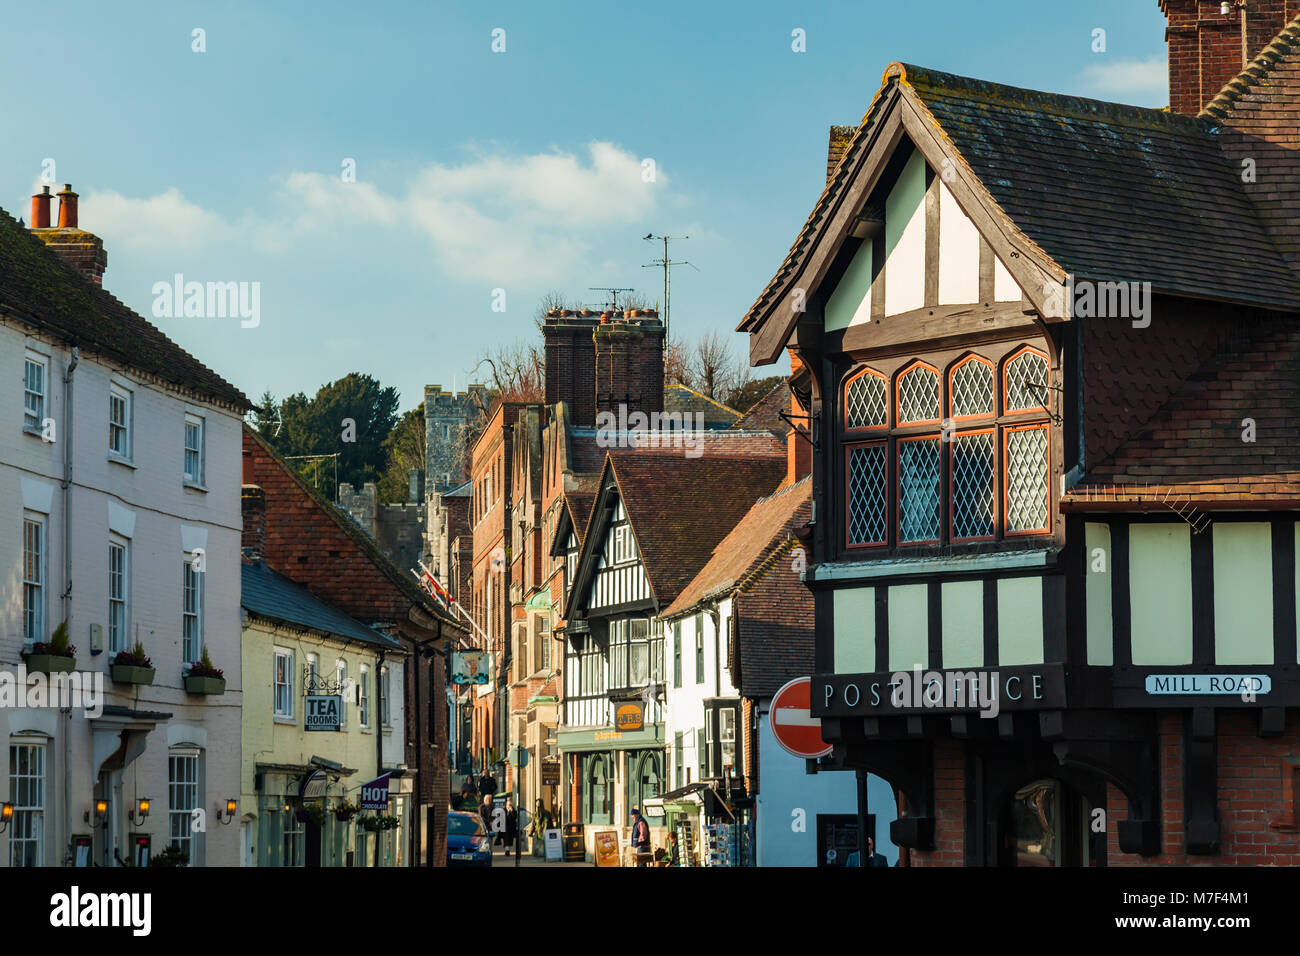 Arundel town centre, West Sussex, England. Stock Photo